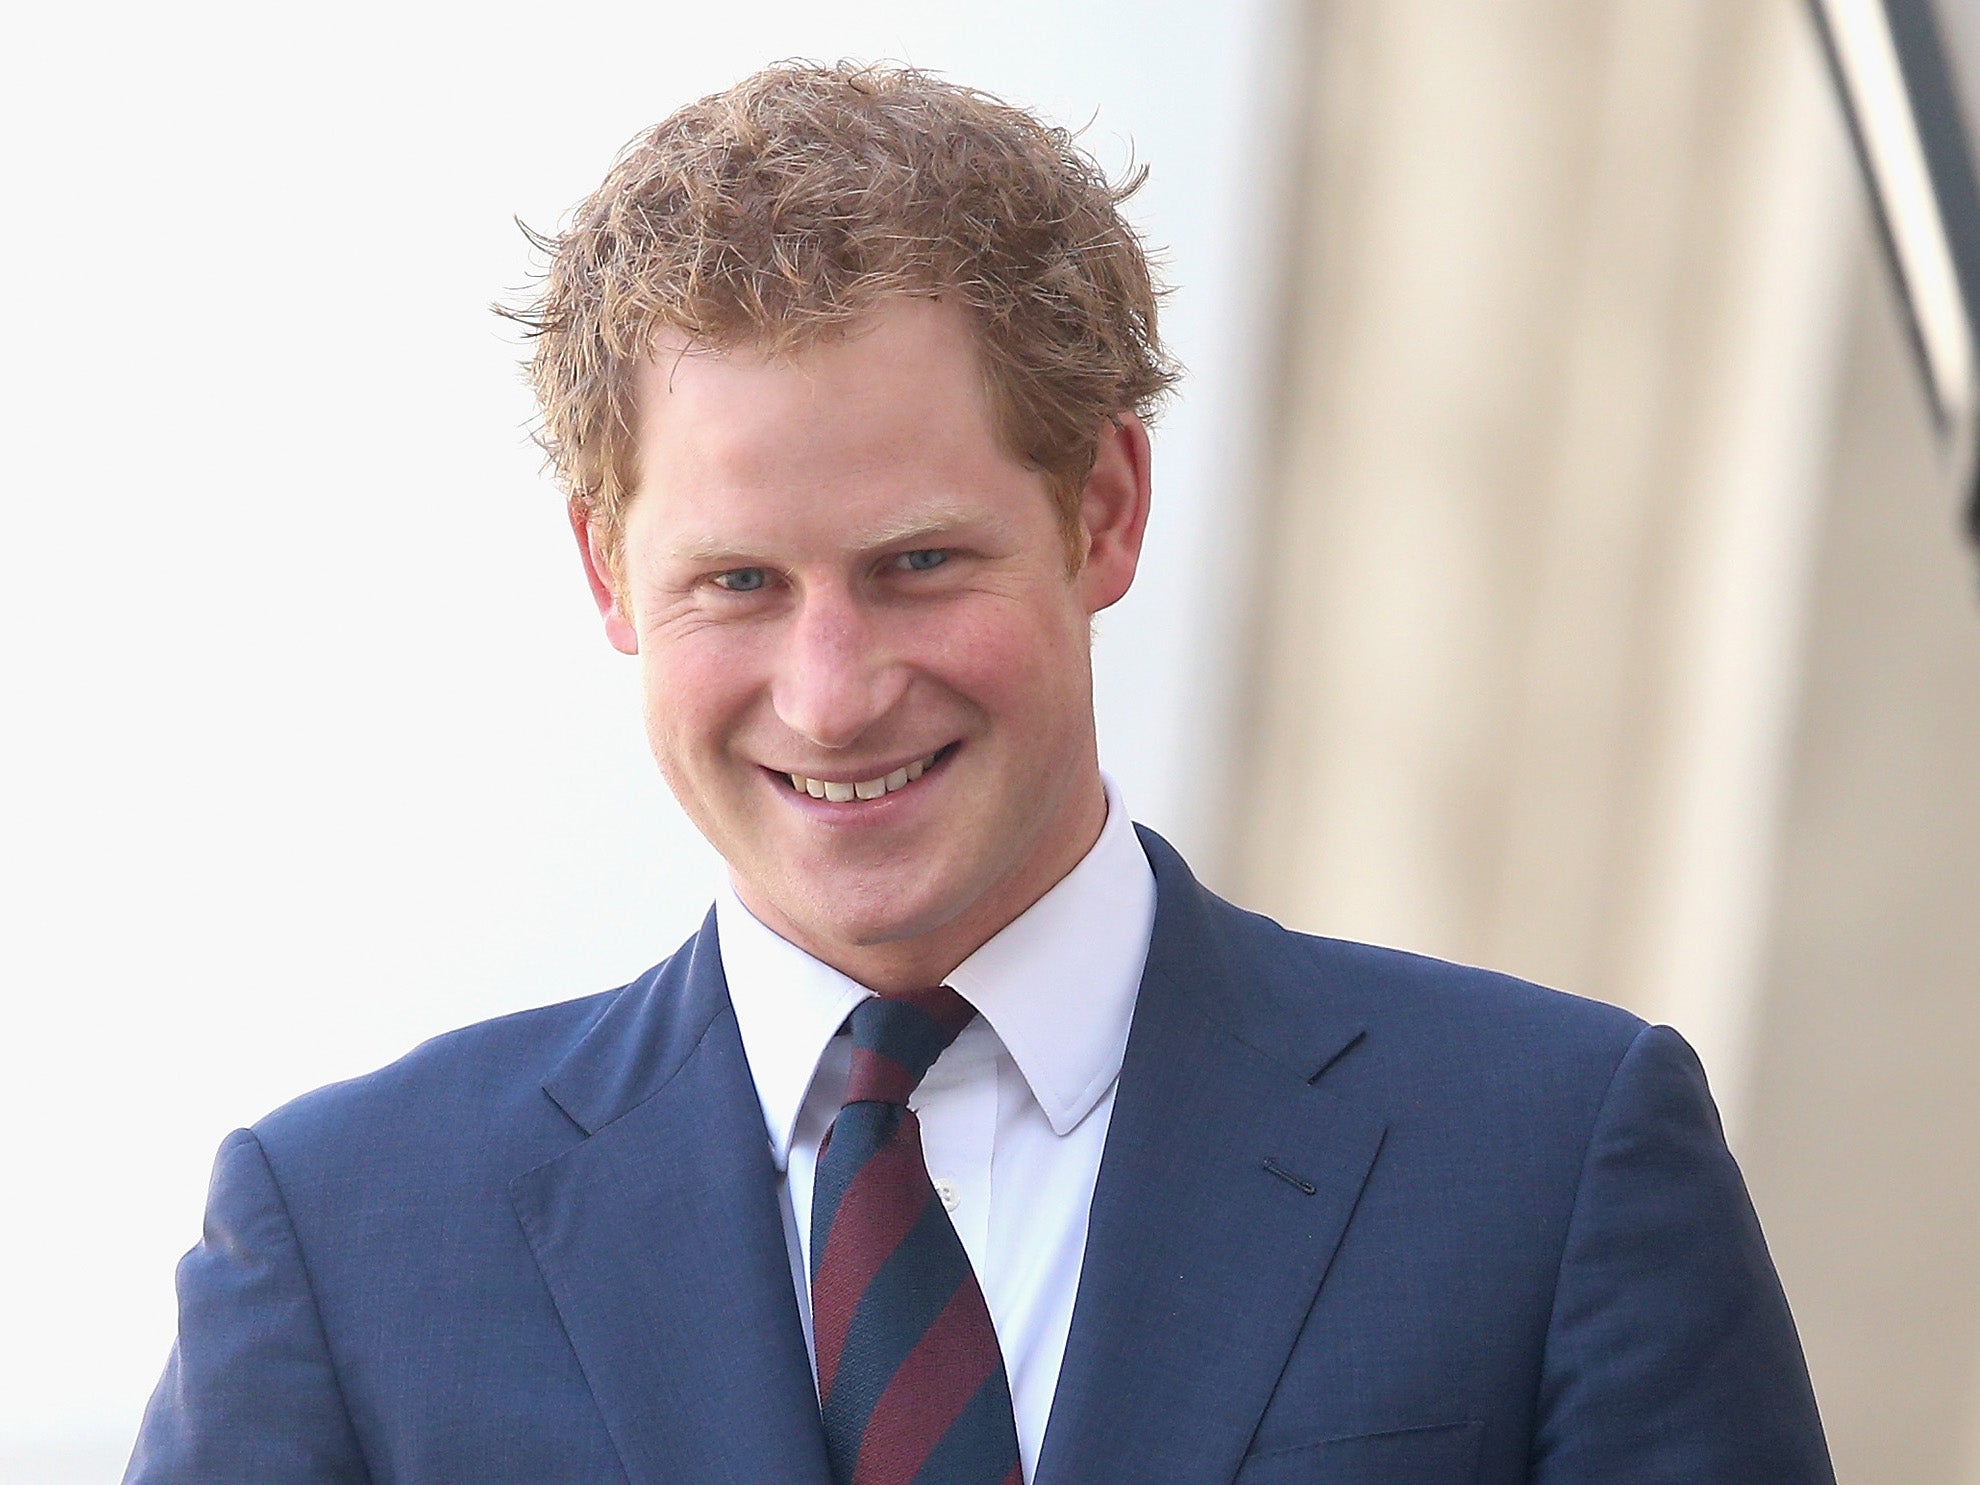 Prince Harry has been in the army for ten years